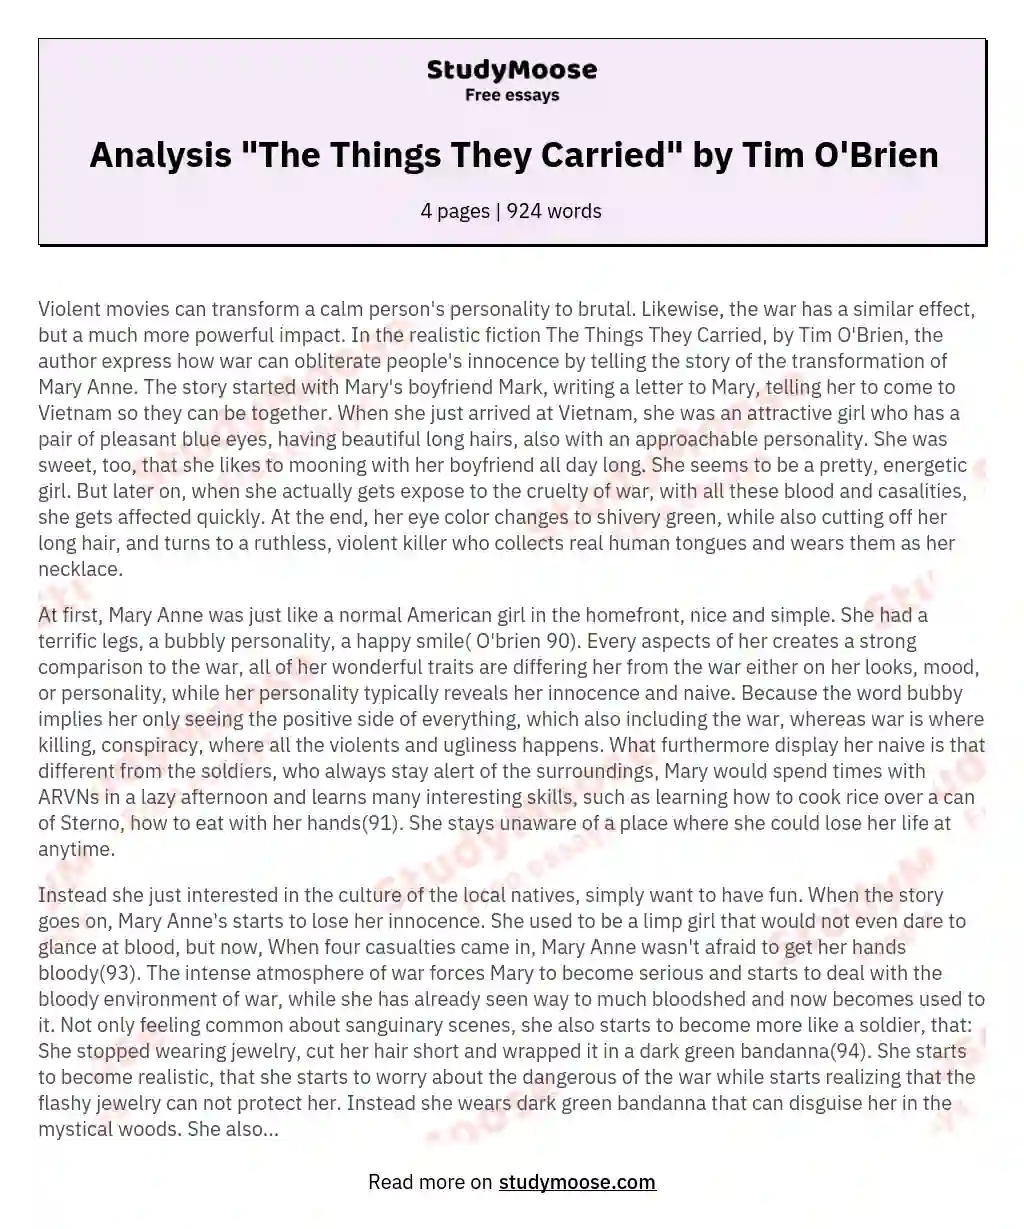 Analysis "The Things They Carried" by Tim O'Brien